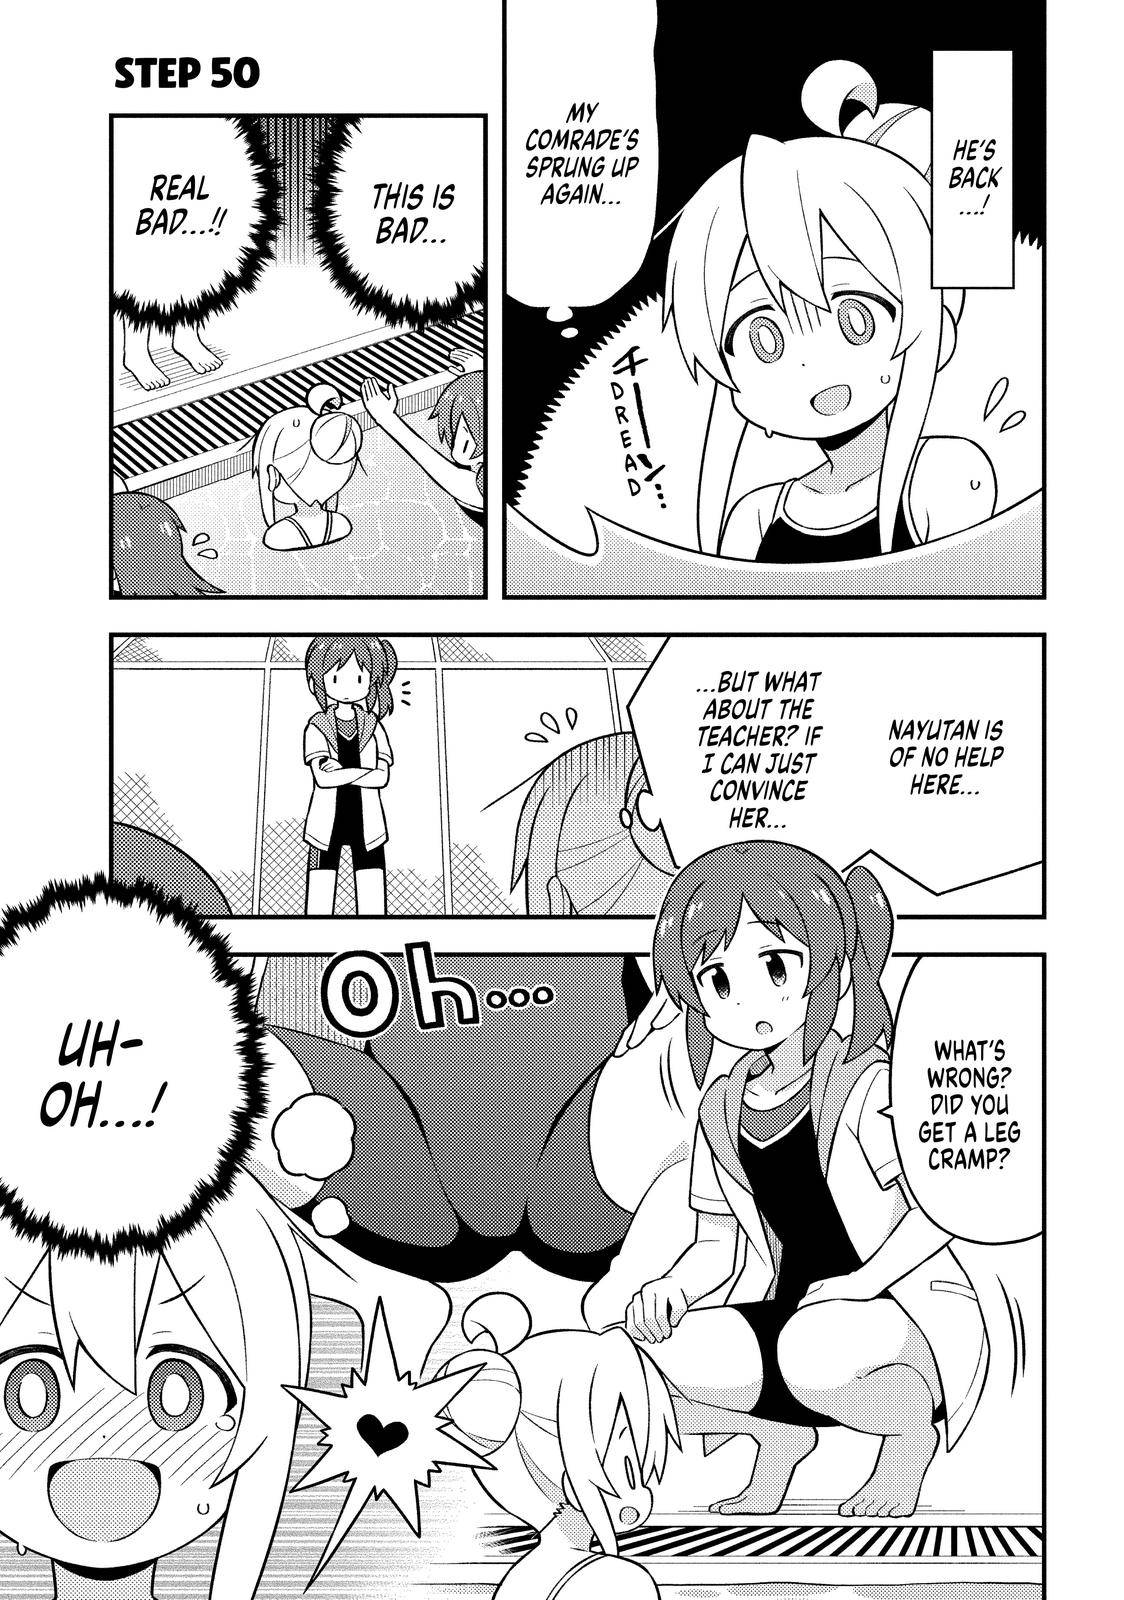 ONIMAI - I'm Now Your Sister! - chapter 50 - #1